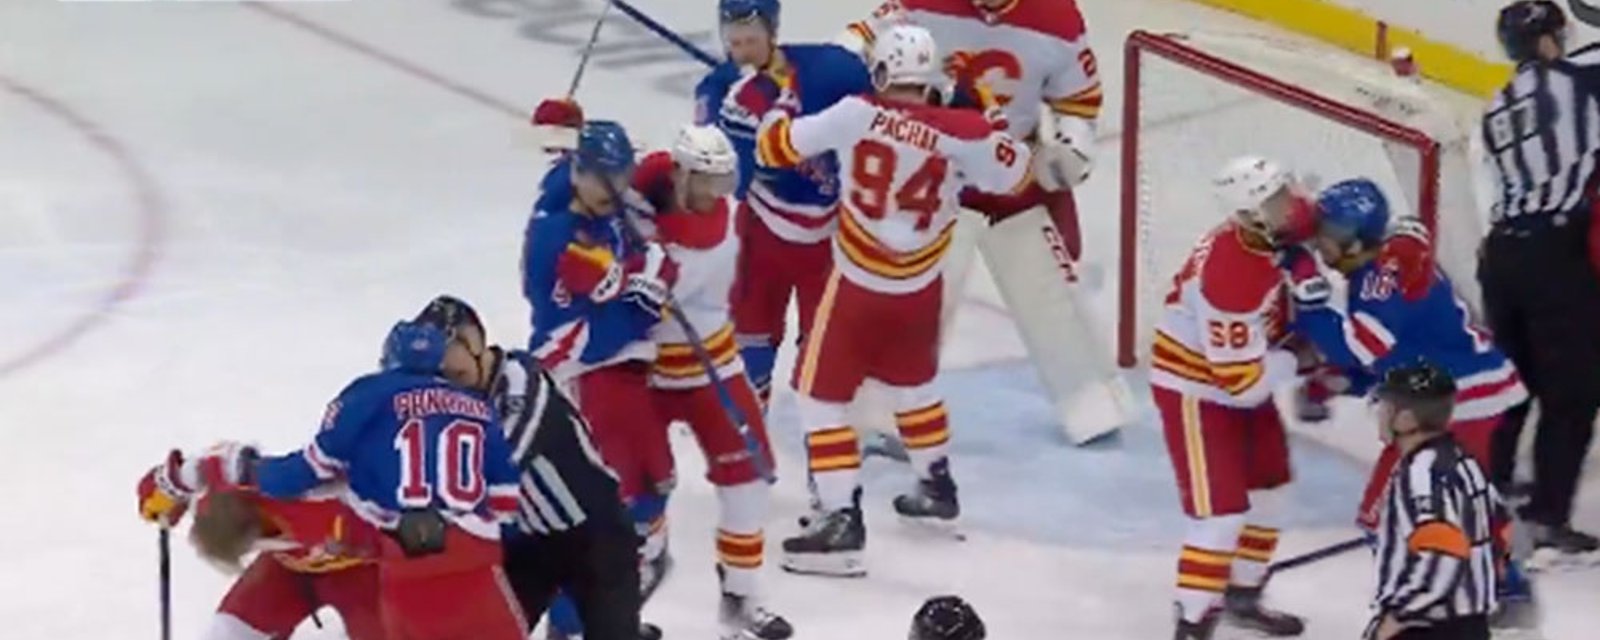 An old fashioned line brawl between Rangers and Flames!